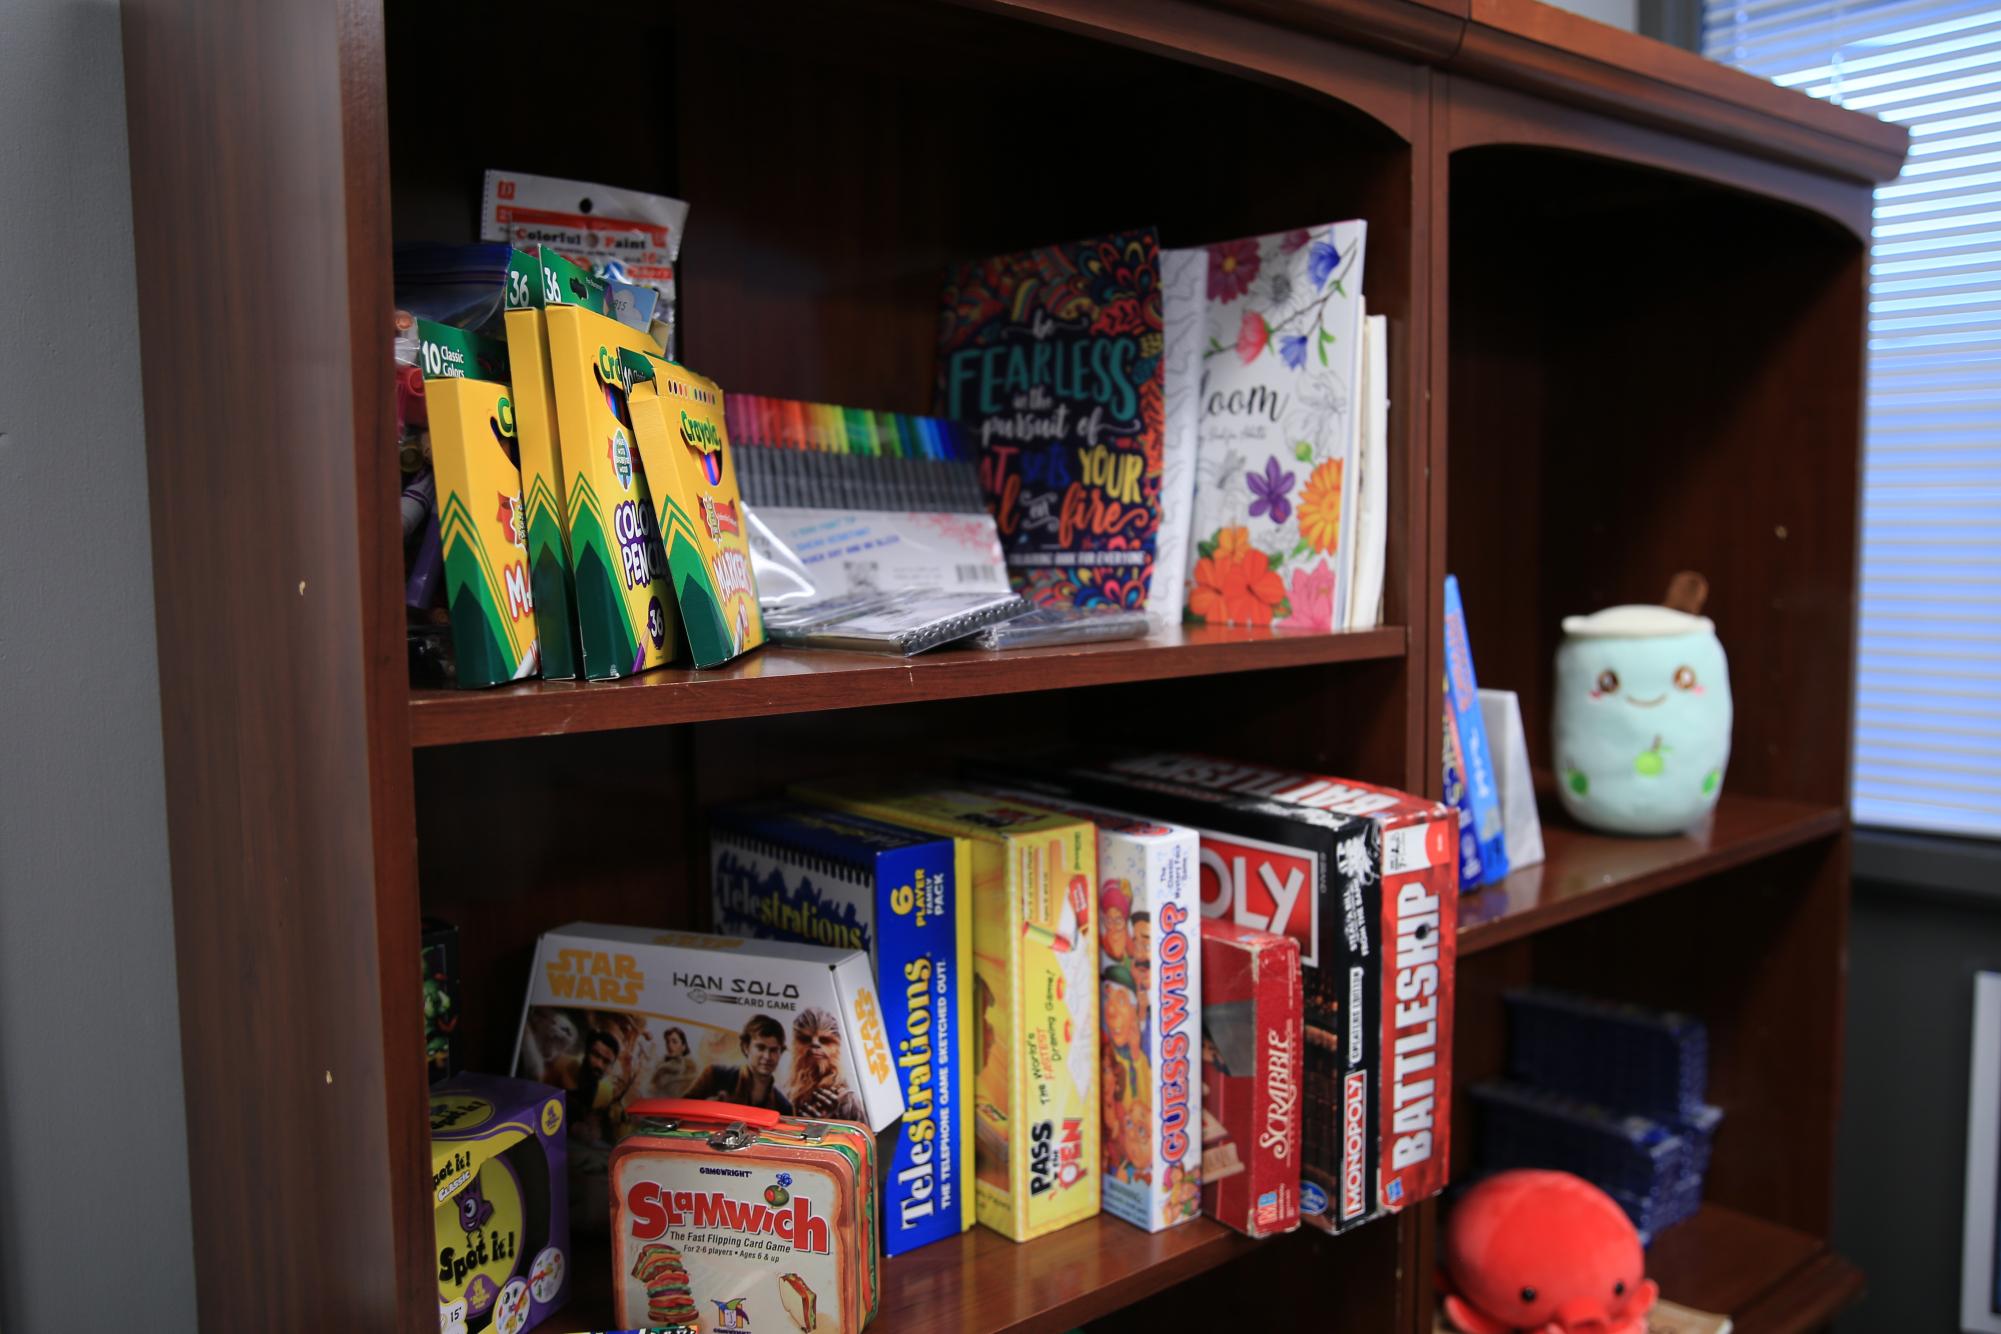 The ELD Center is equipped with board games to help facilitate interactions between students in the center.